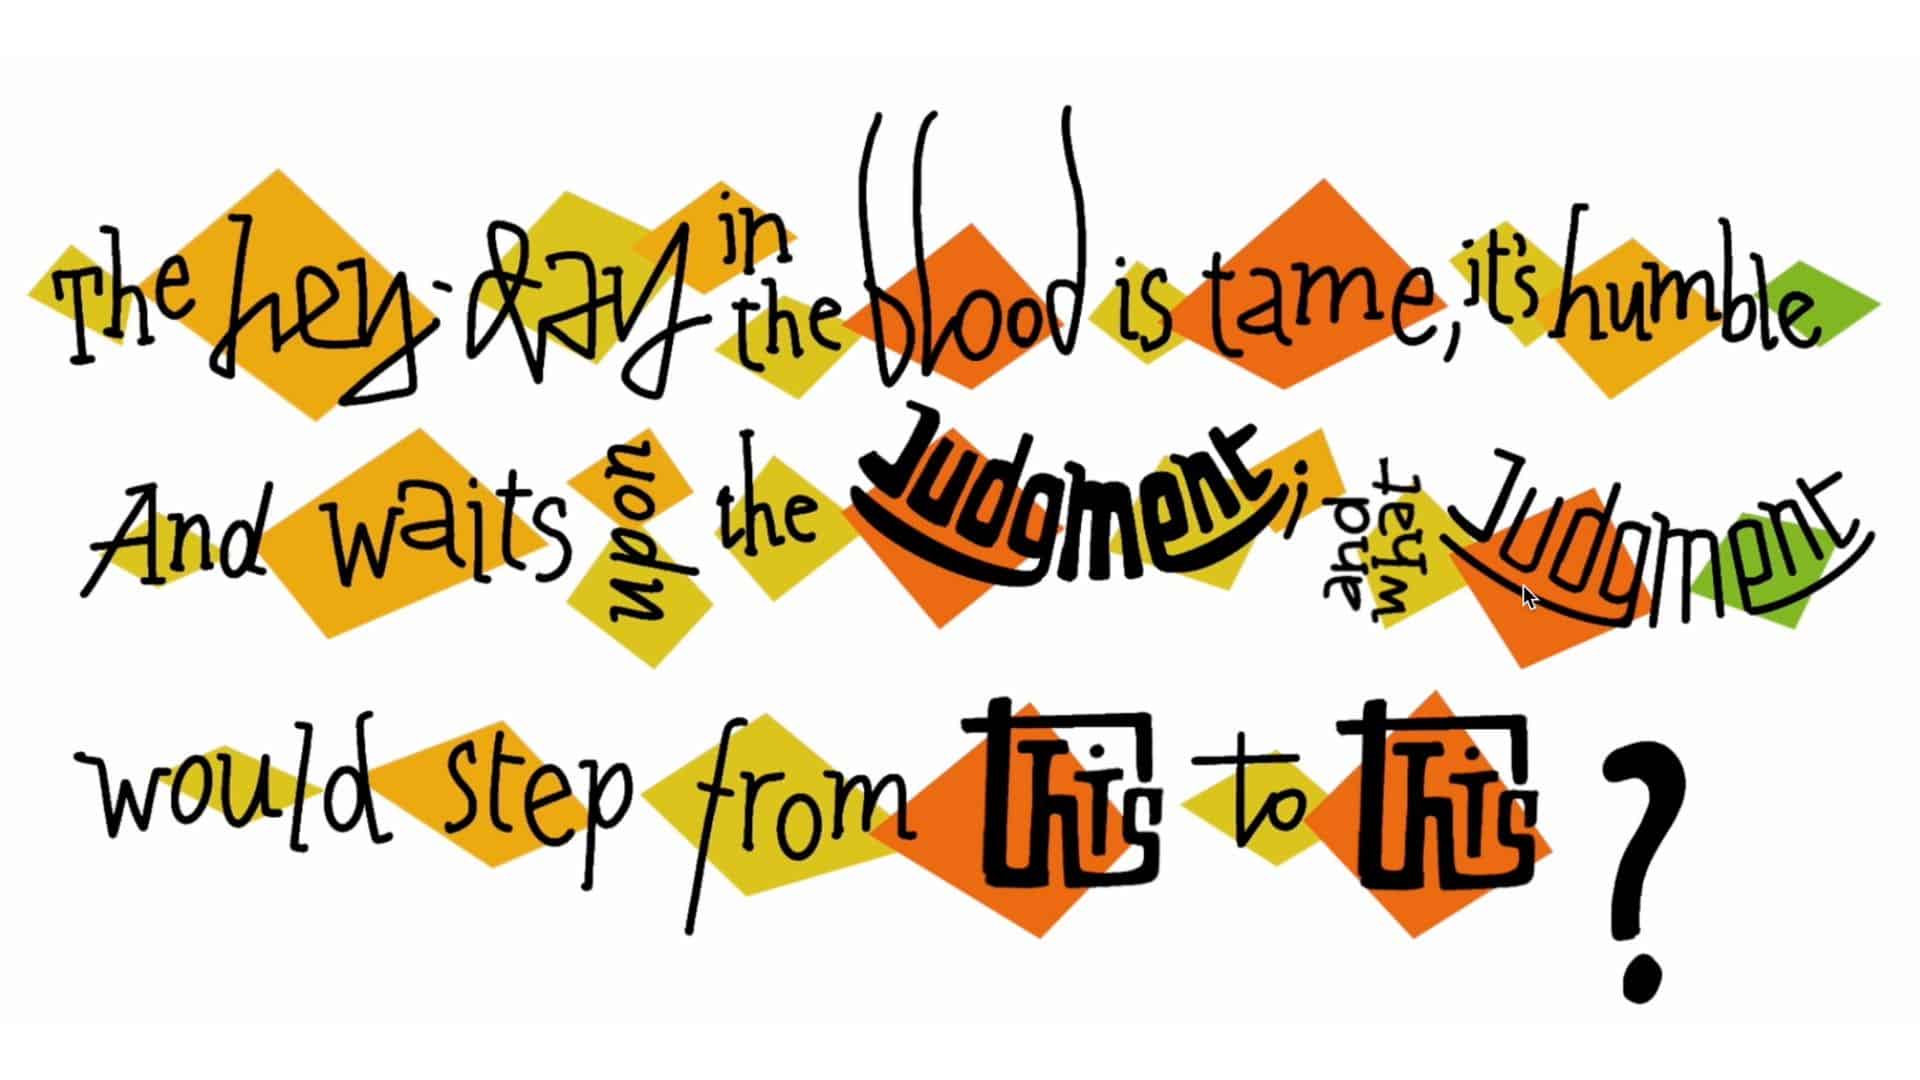 A section from a verse of text from Shakespeare's Hamlet. The words have greens, yellows and orange blocks behind them.